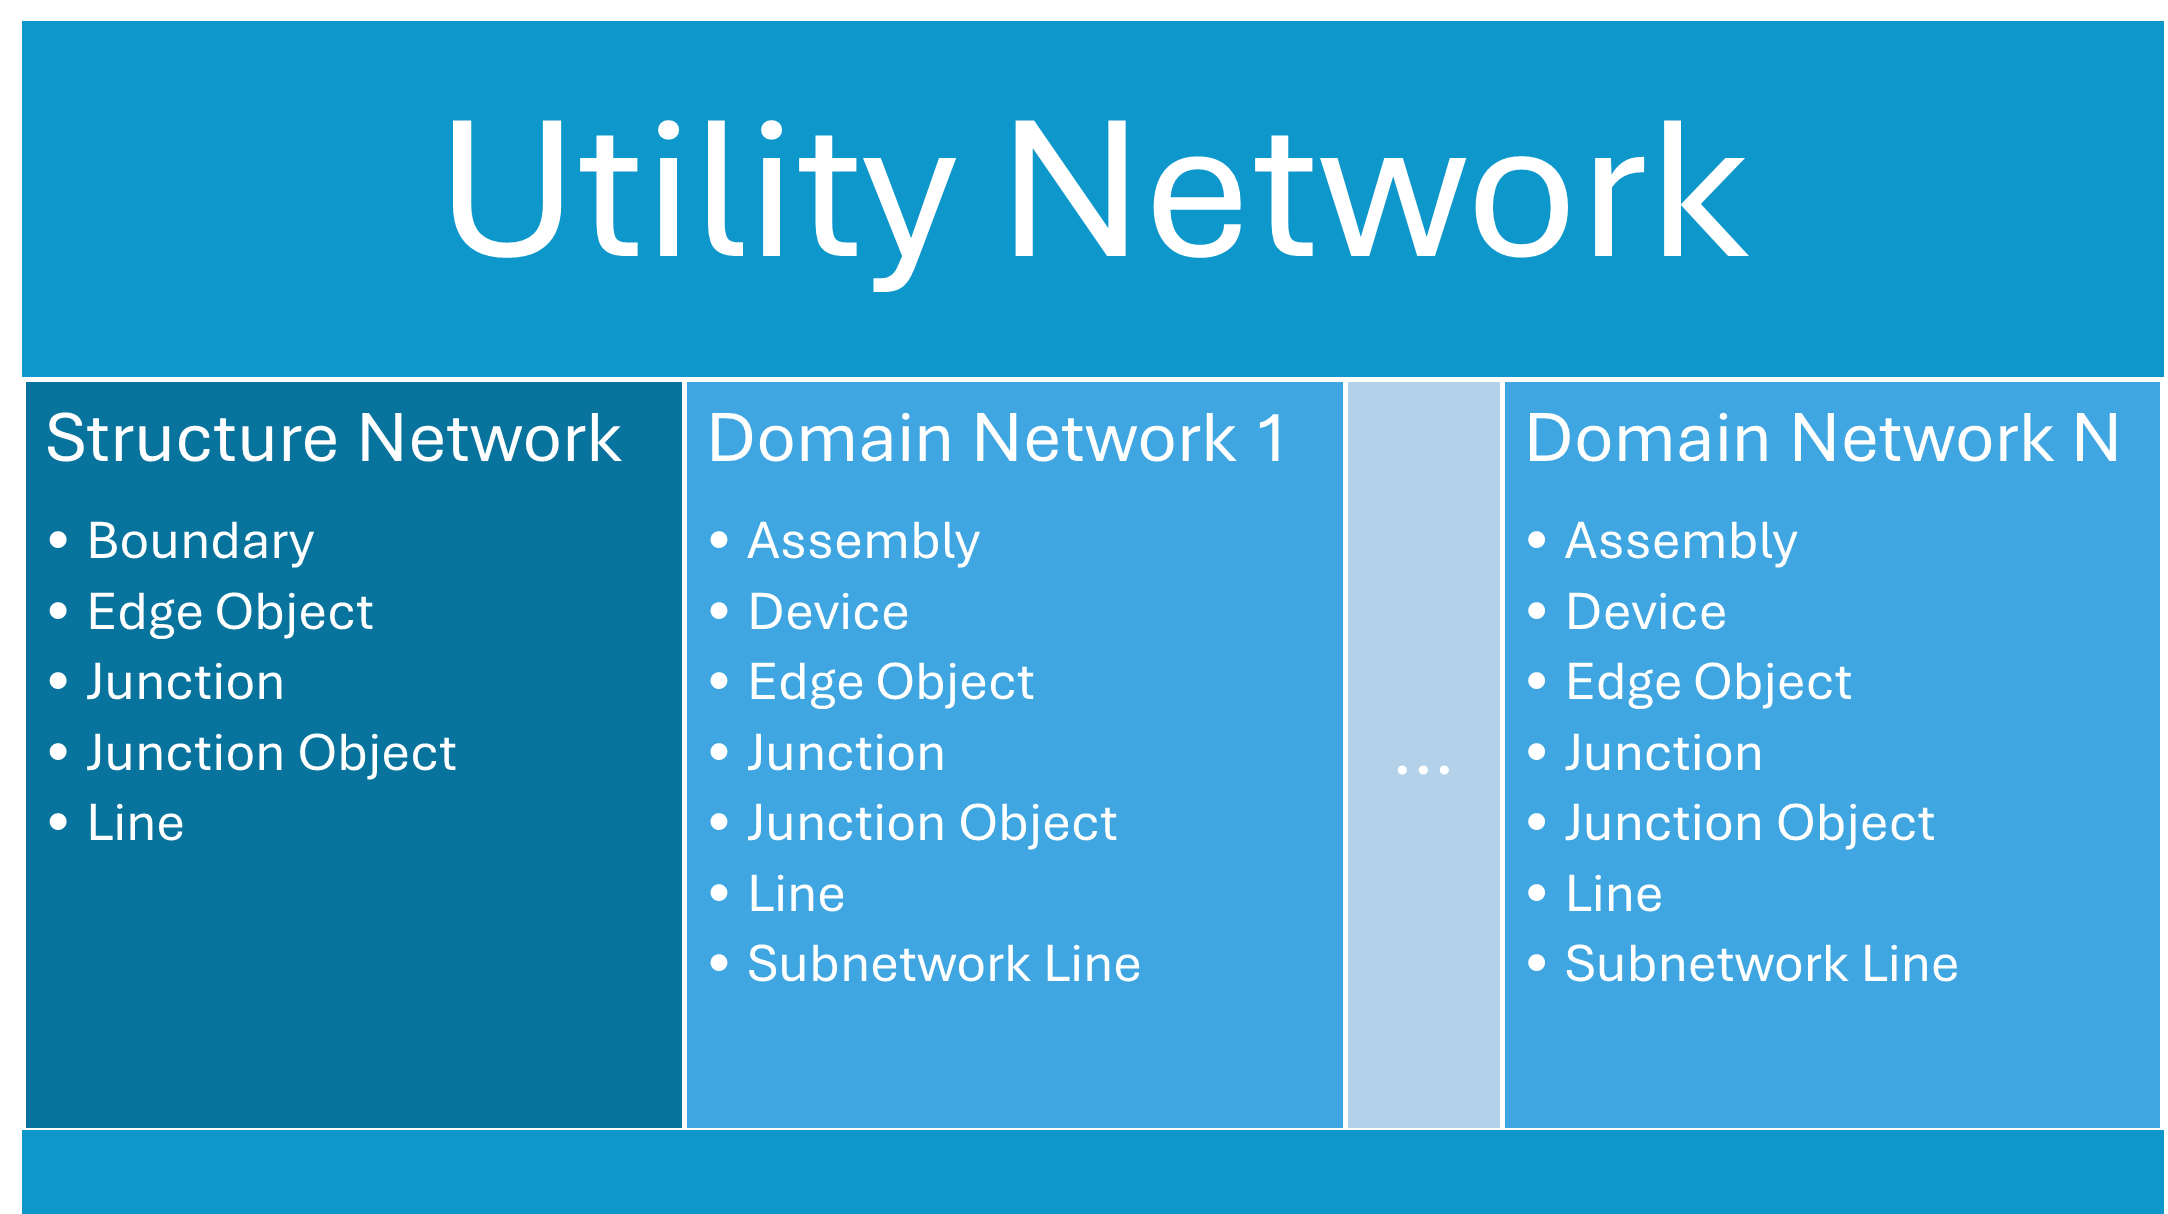 A table that shows an example of domain networks in the utility network. The first row says utility network. The second row has four columns. The first column says structure network and has a bulleted list of layers. The second columns says domain network 1 and has a bulleted list of layers that are different from the structure network layers. The third column is smaller and contains three dots. The fourth column says domain network n and has a bulleted list of layers that is the same as domain network 1.